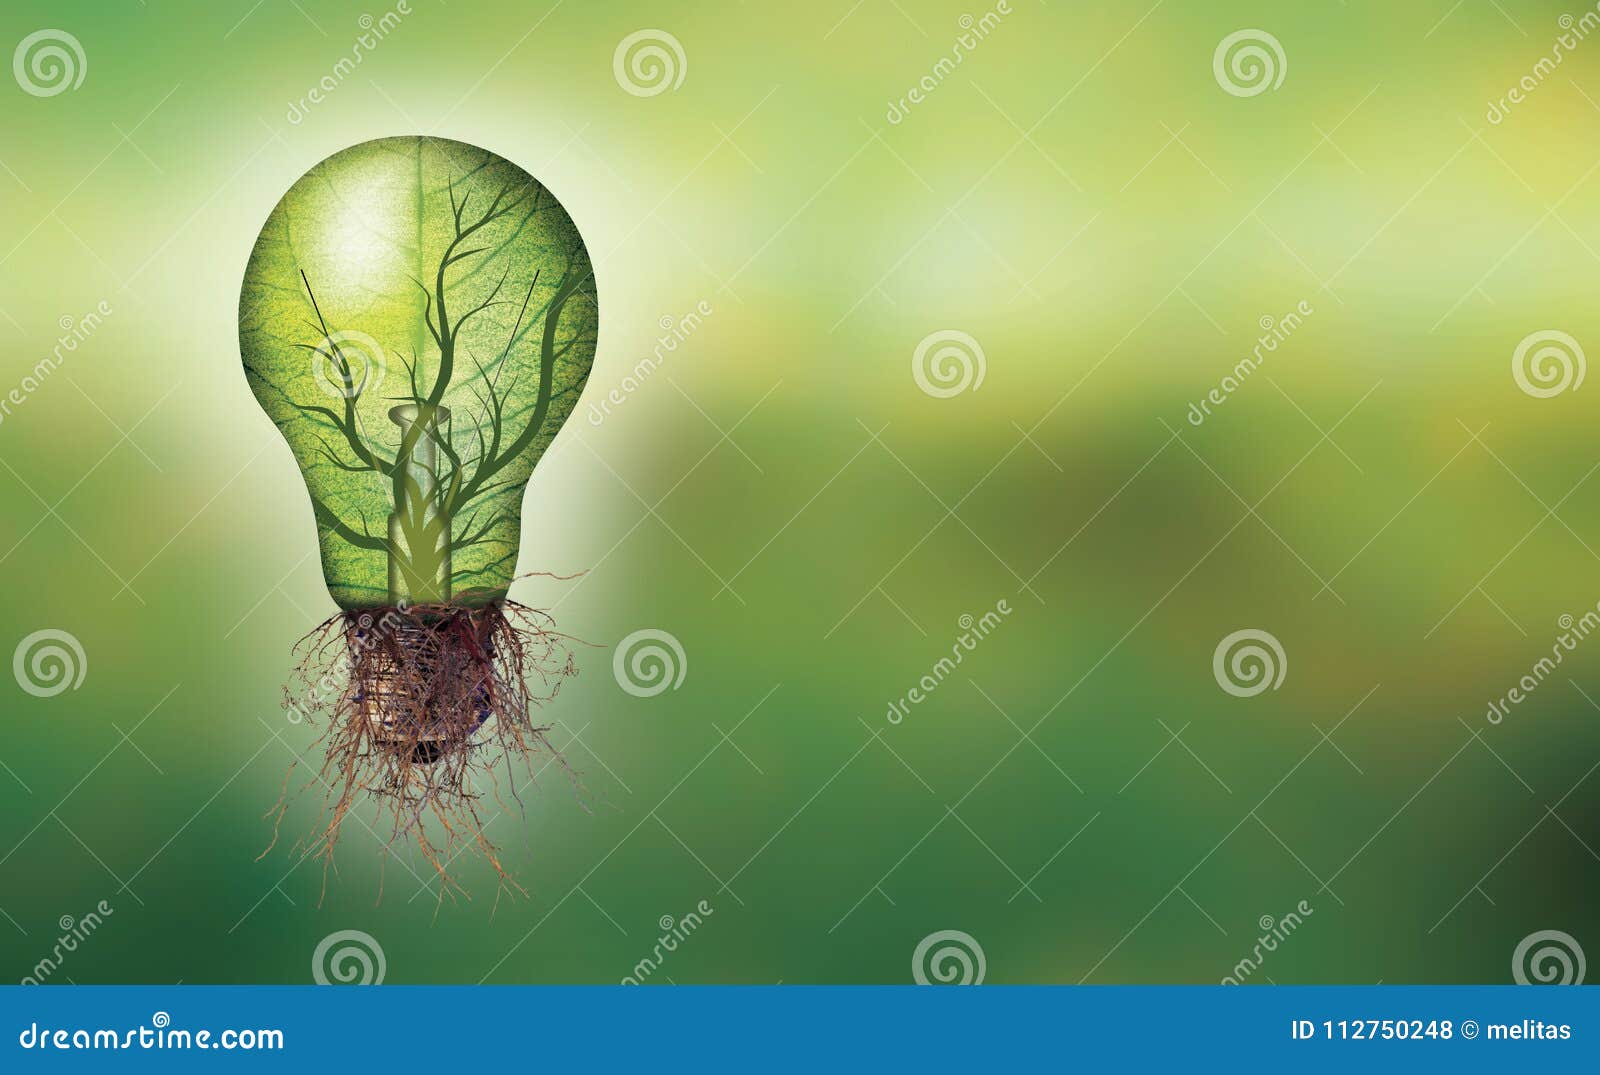 banner renewable energy concept - eco light bulb with leaf and branches inside and roots